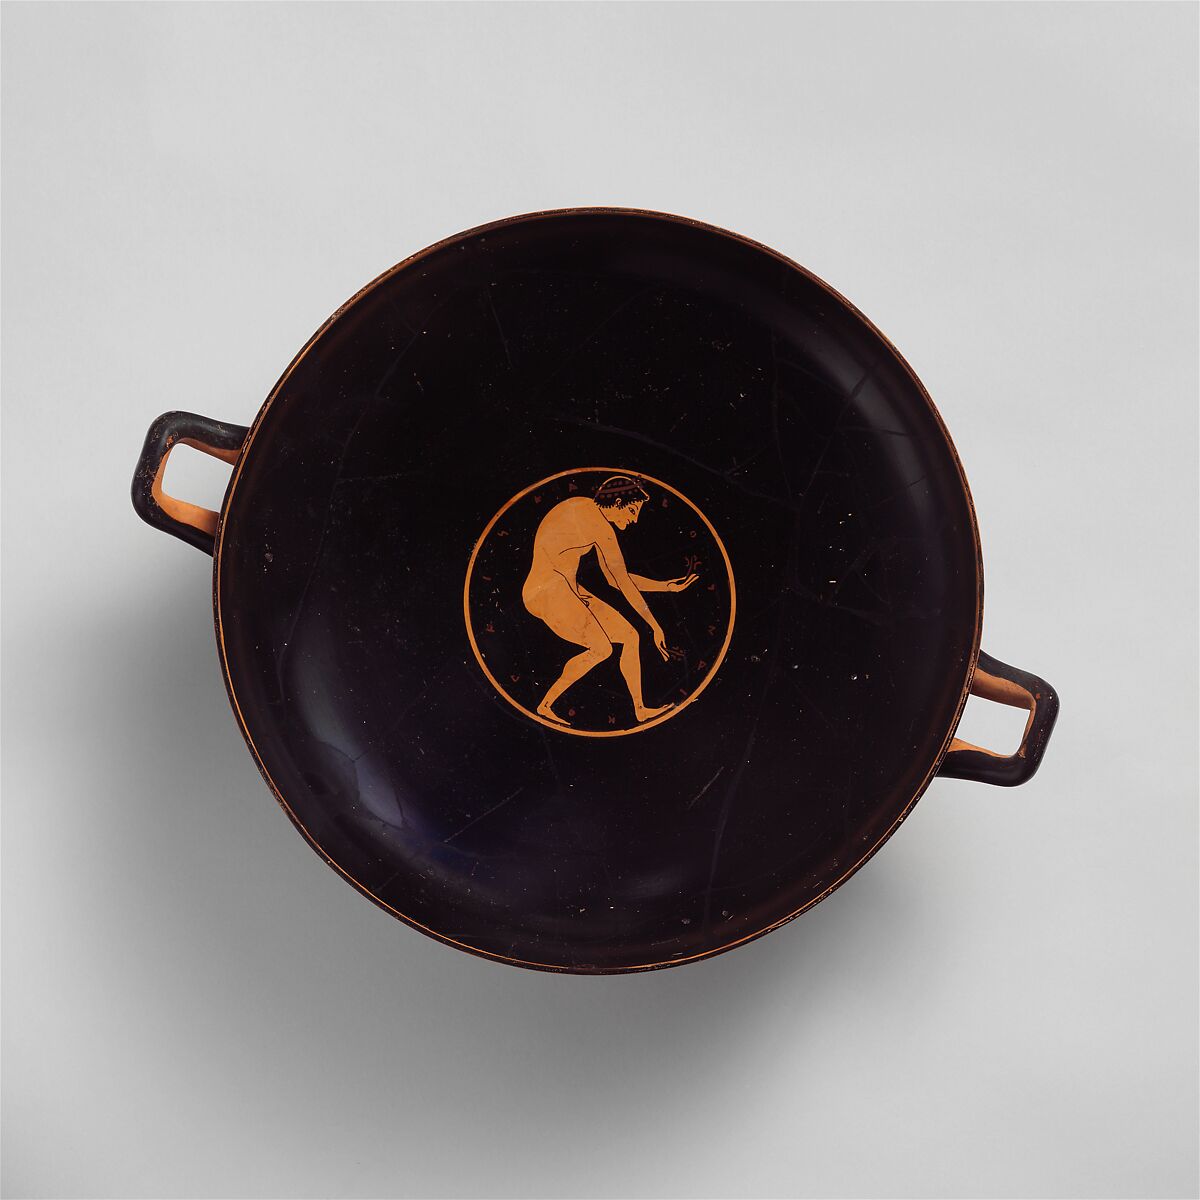 Terracotta kylix (drinking cup), Attributed to the Euergides Painter, Terracotta, Greek, Attic 